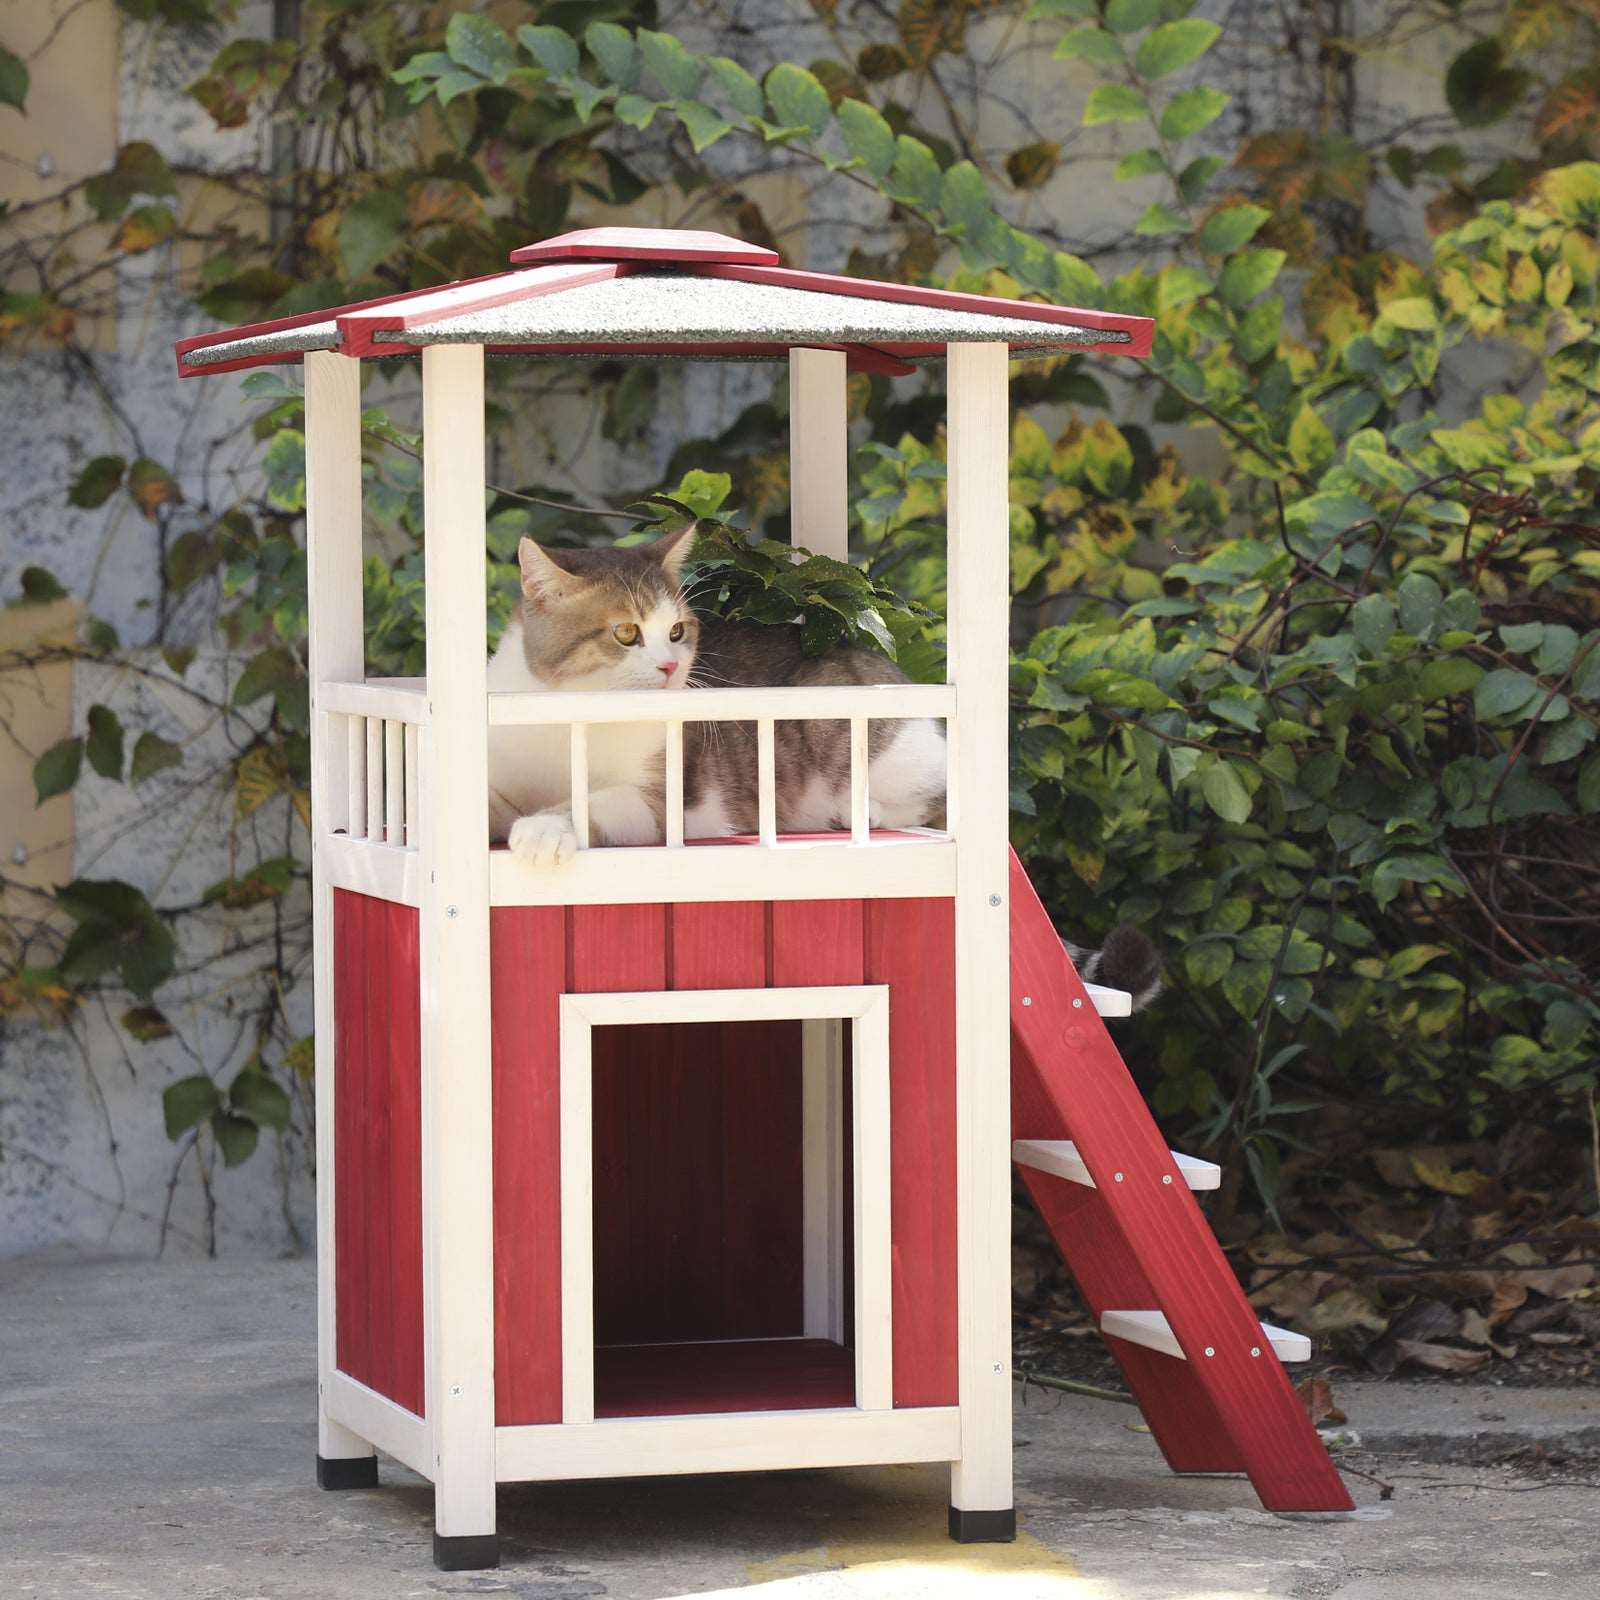 Petsfit-Outside-2-Story-Wood-Cat-Condo-with-Ladder-Waterproof-06